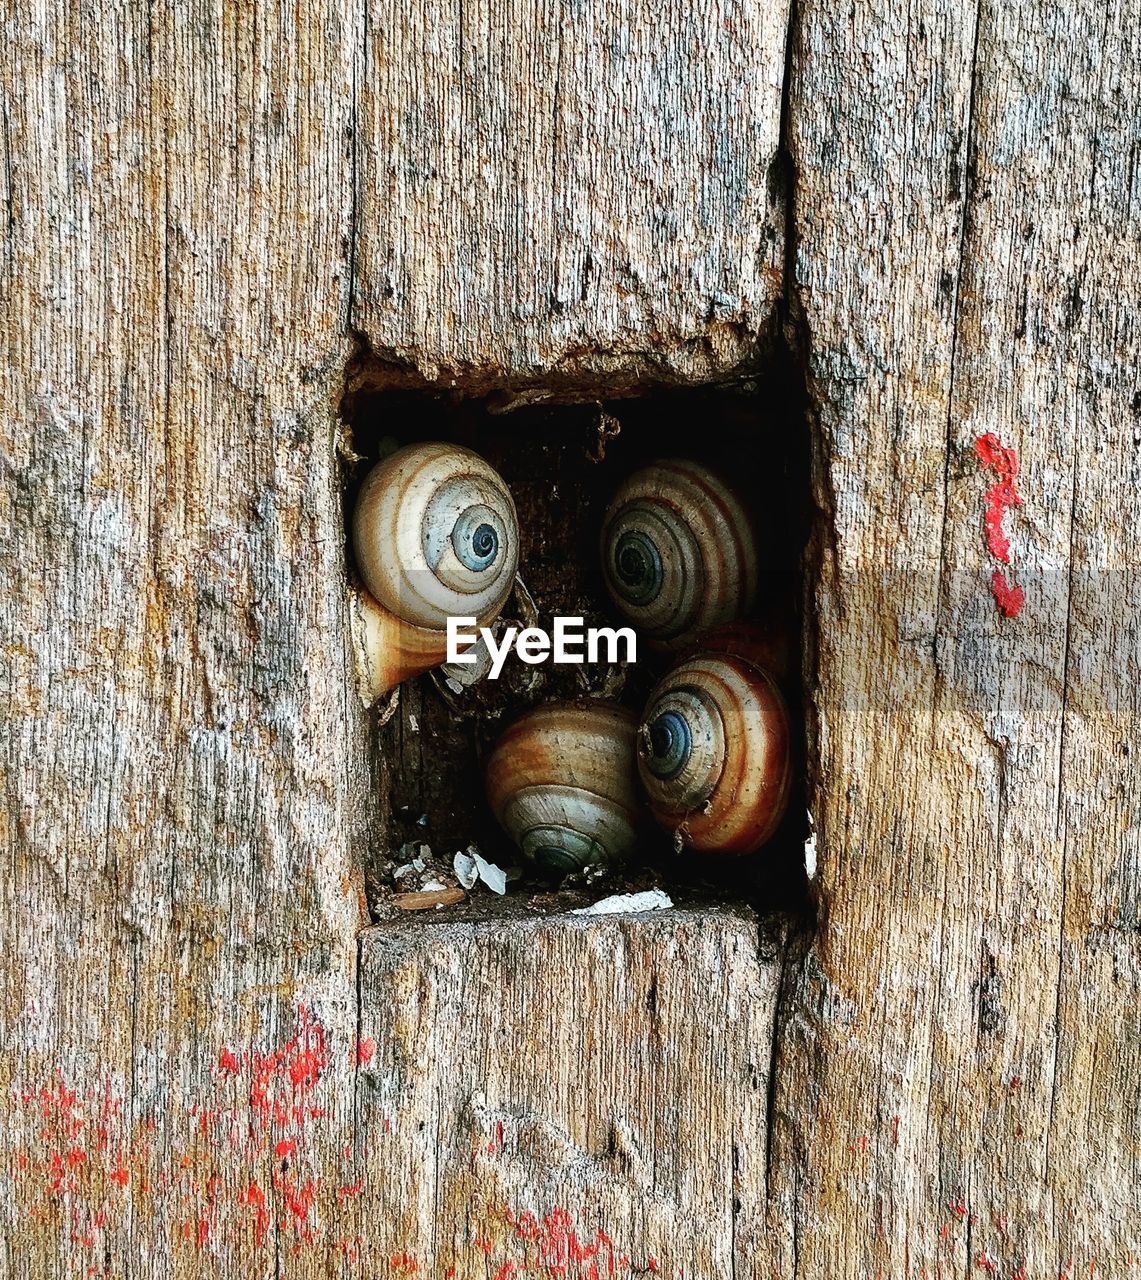 CLOSE-UP OF SNAIL ON WOOD